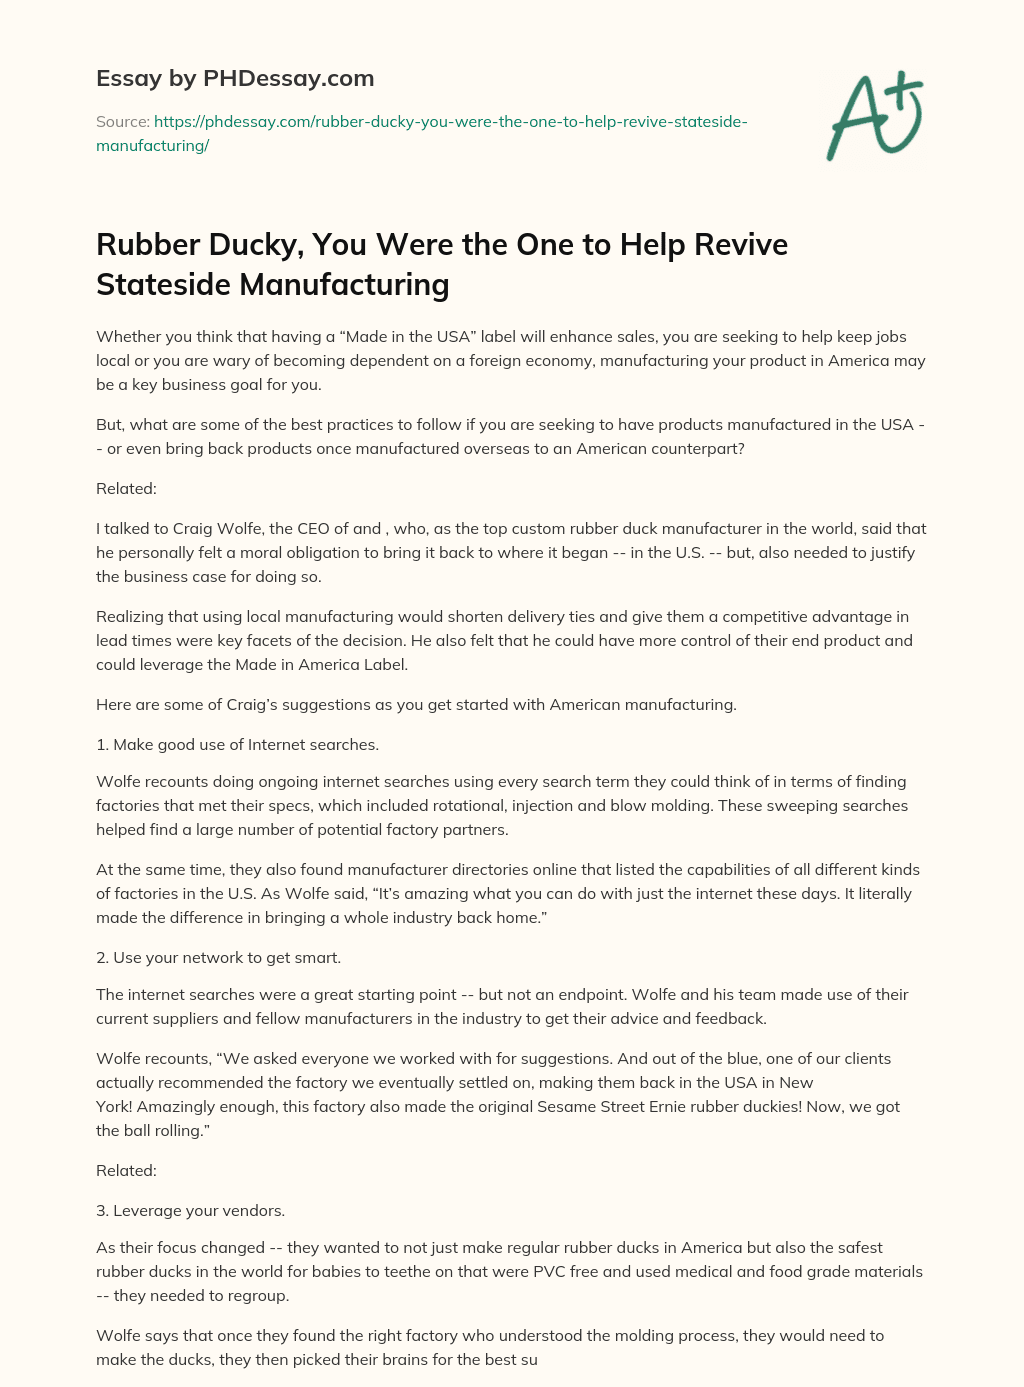 Rubber Ducky, You Were the One to Help Revive Stateside Manufacturing essay